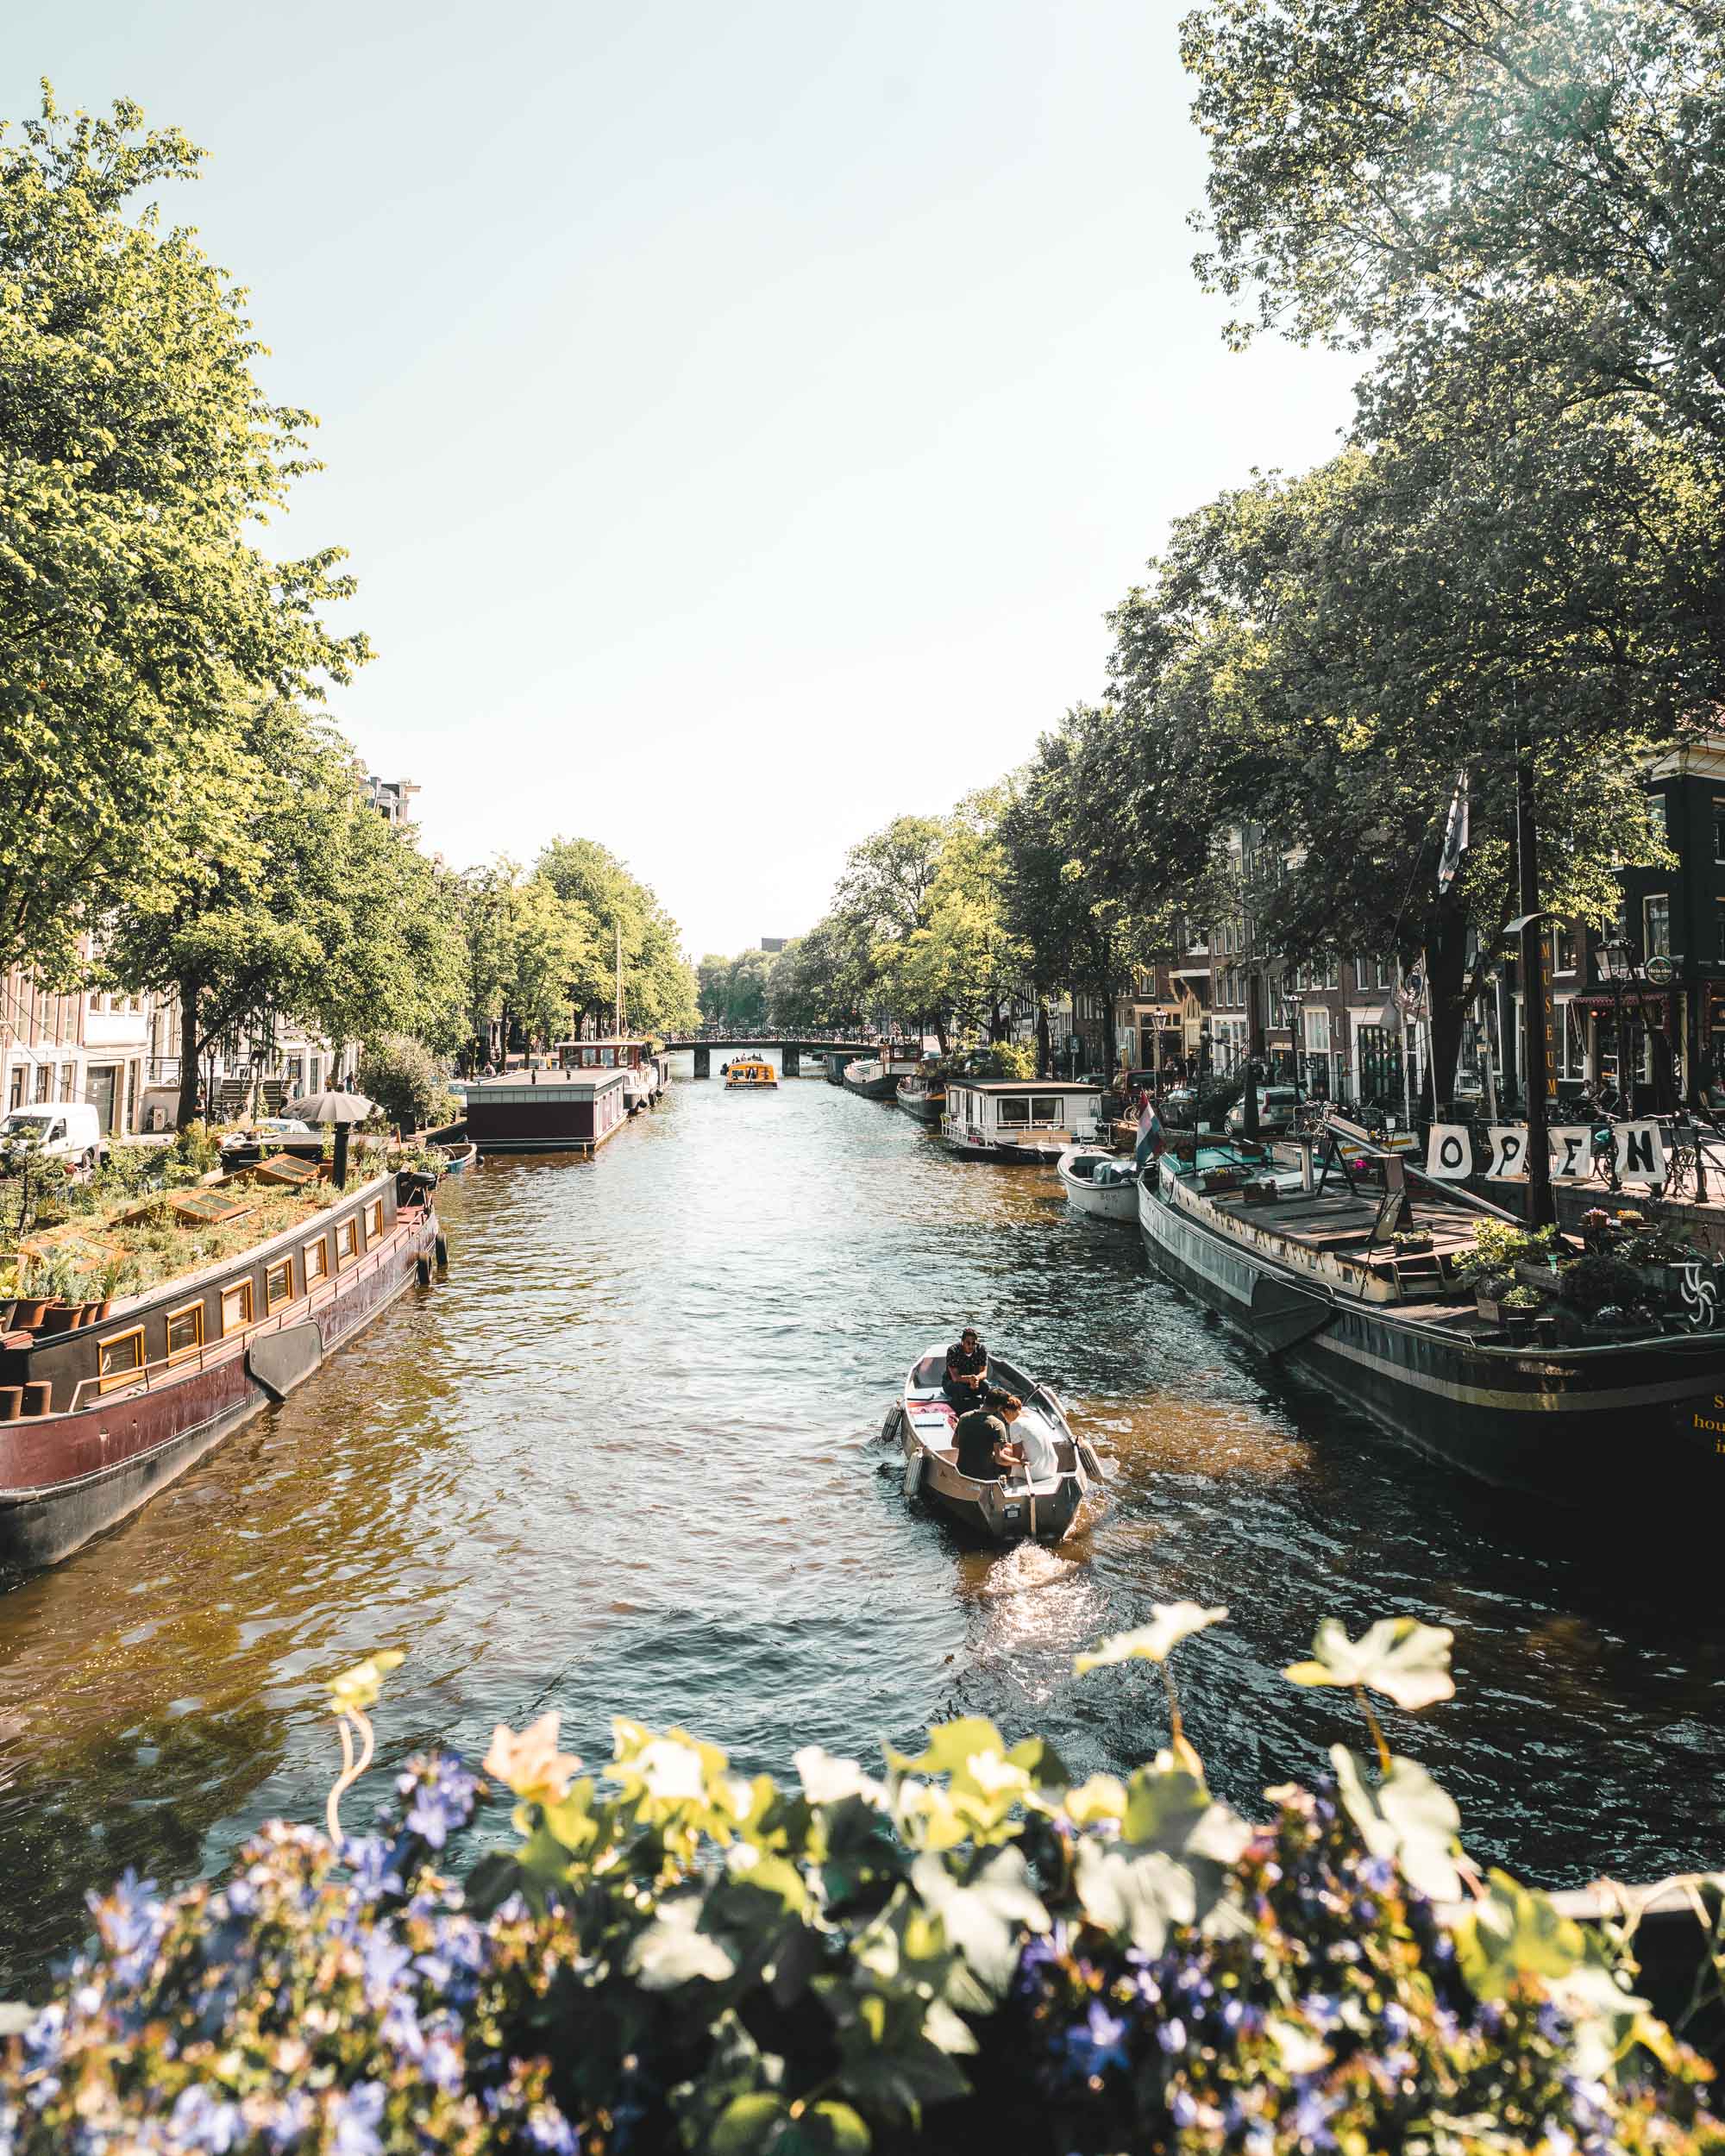 Amsterdam canals and boats in the summertime, The Netherlands